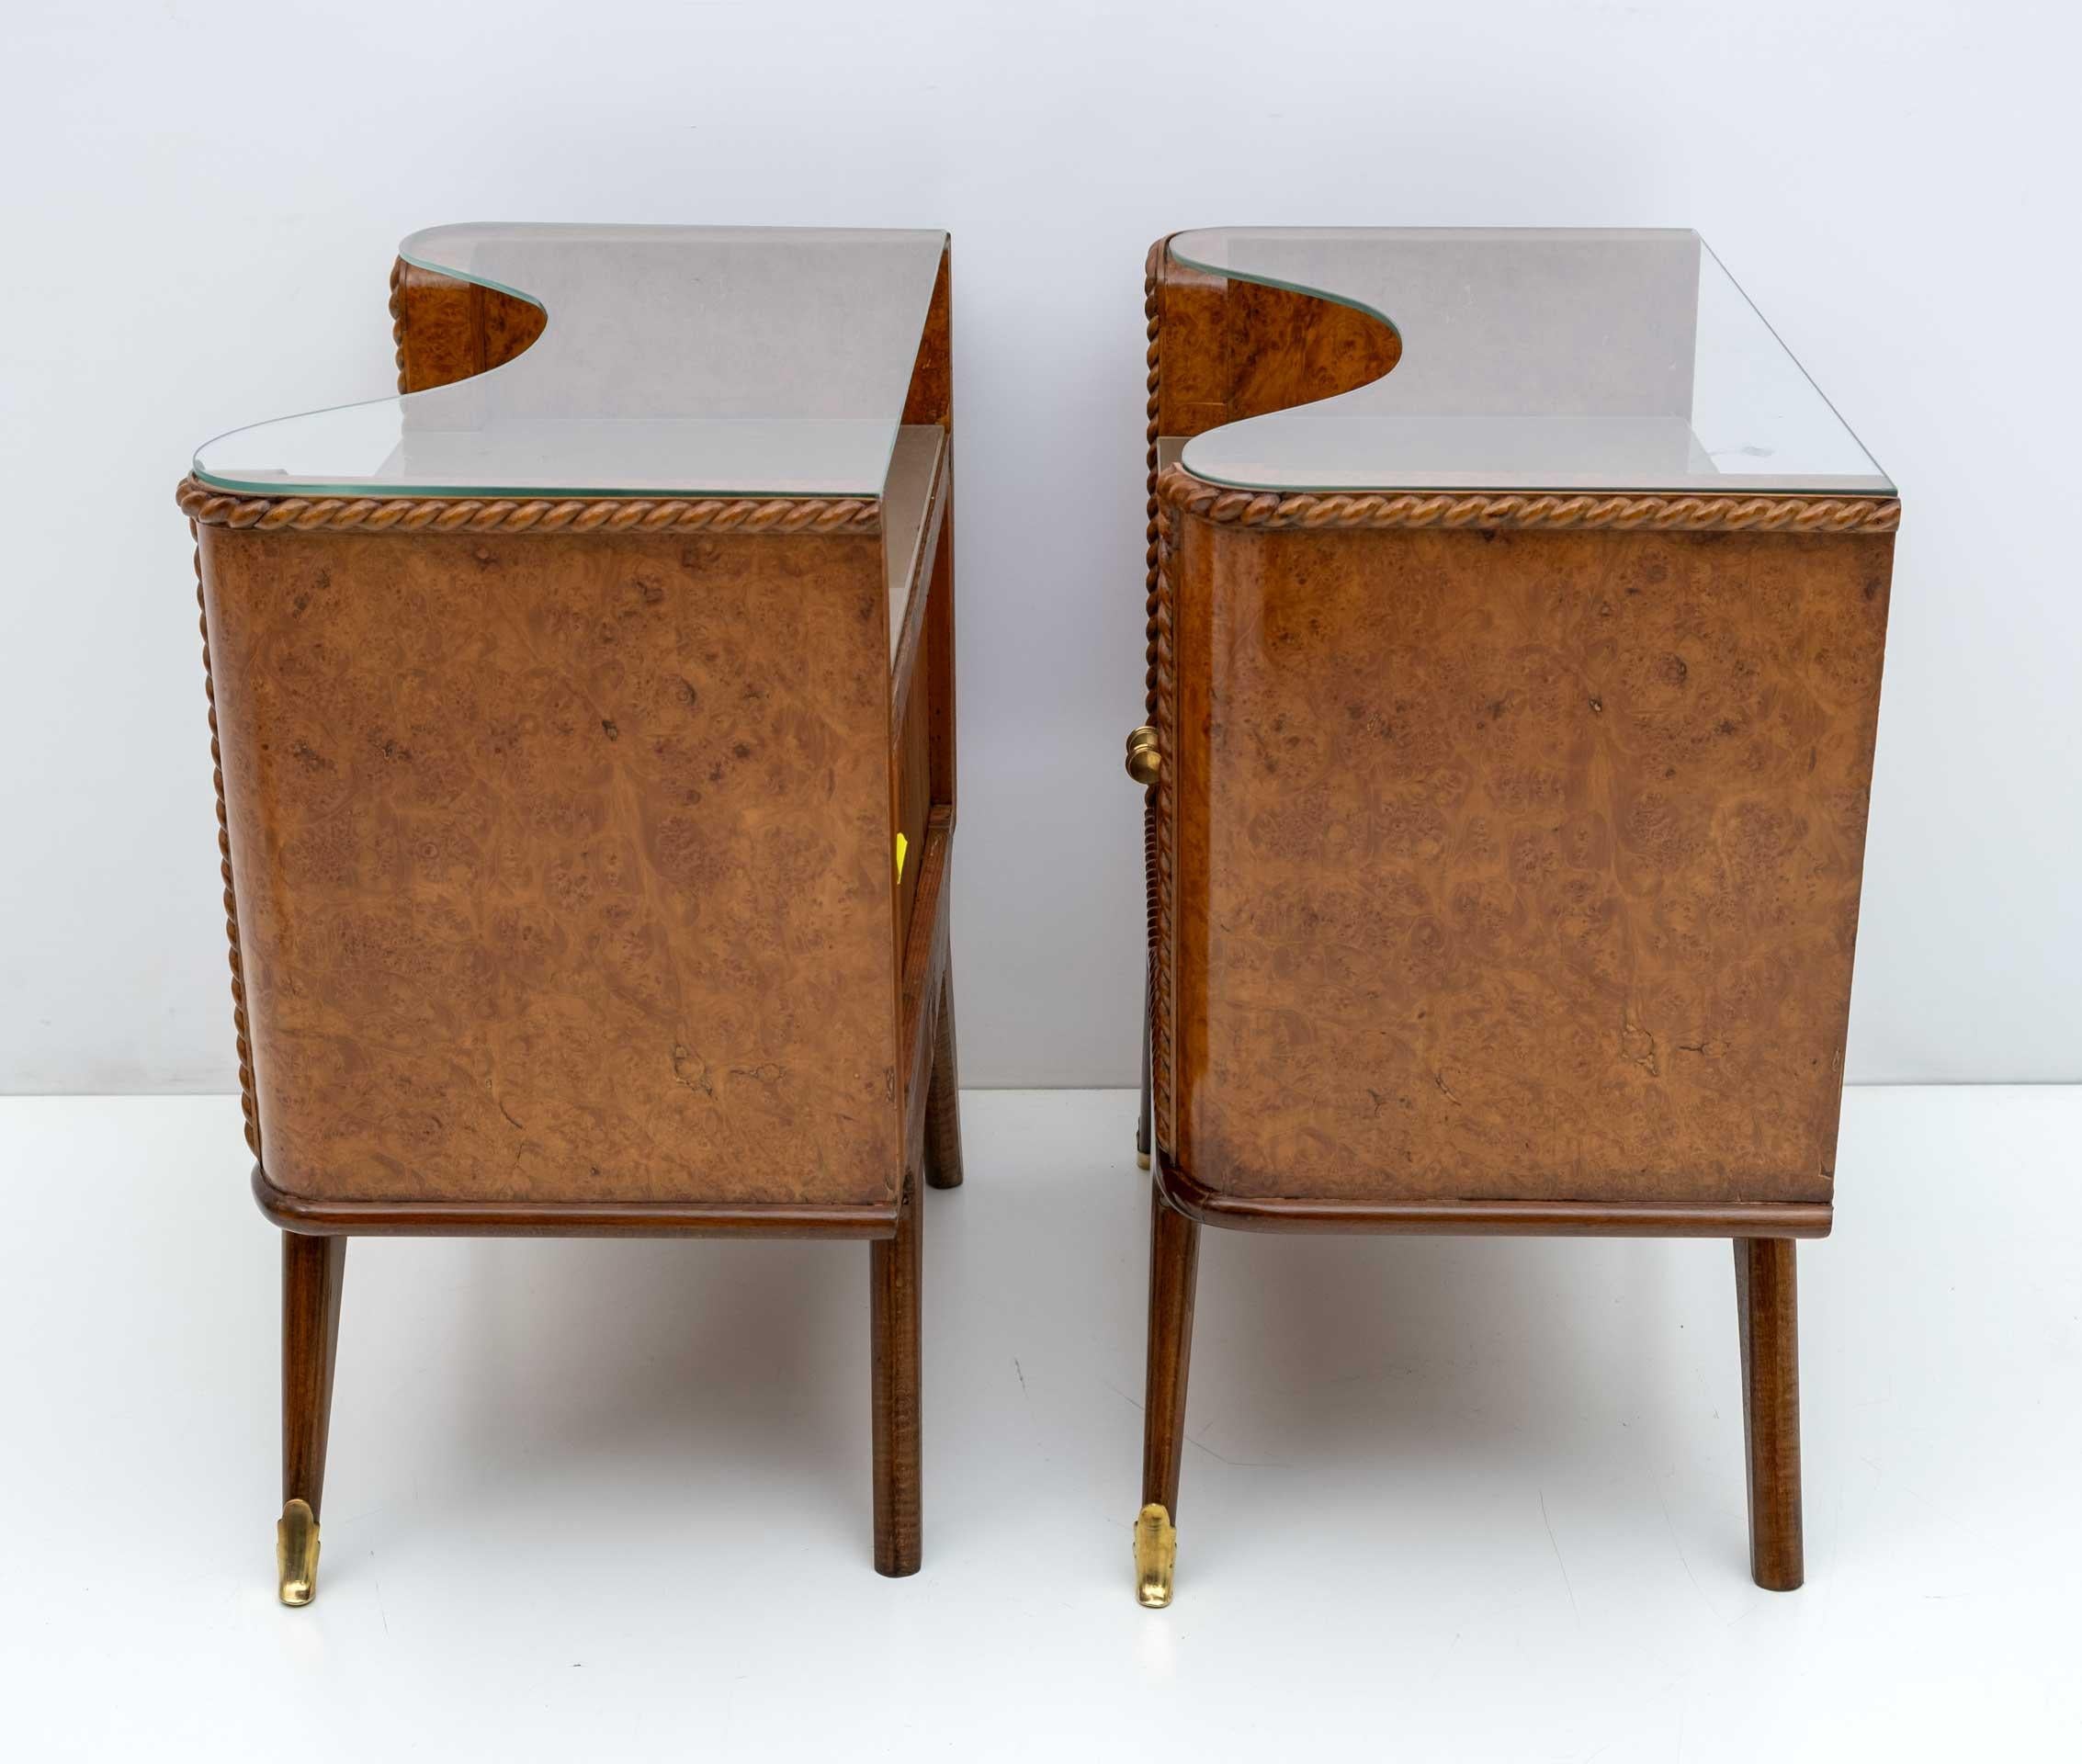 Mid-20th Century Pair of Art Deco Italian Briar Walnut Bedside Tables, 1930s For Sale